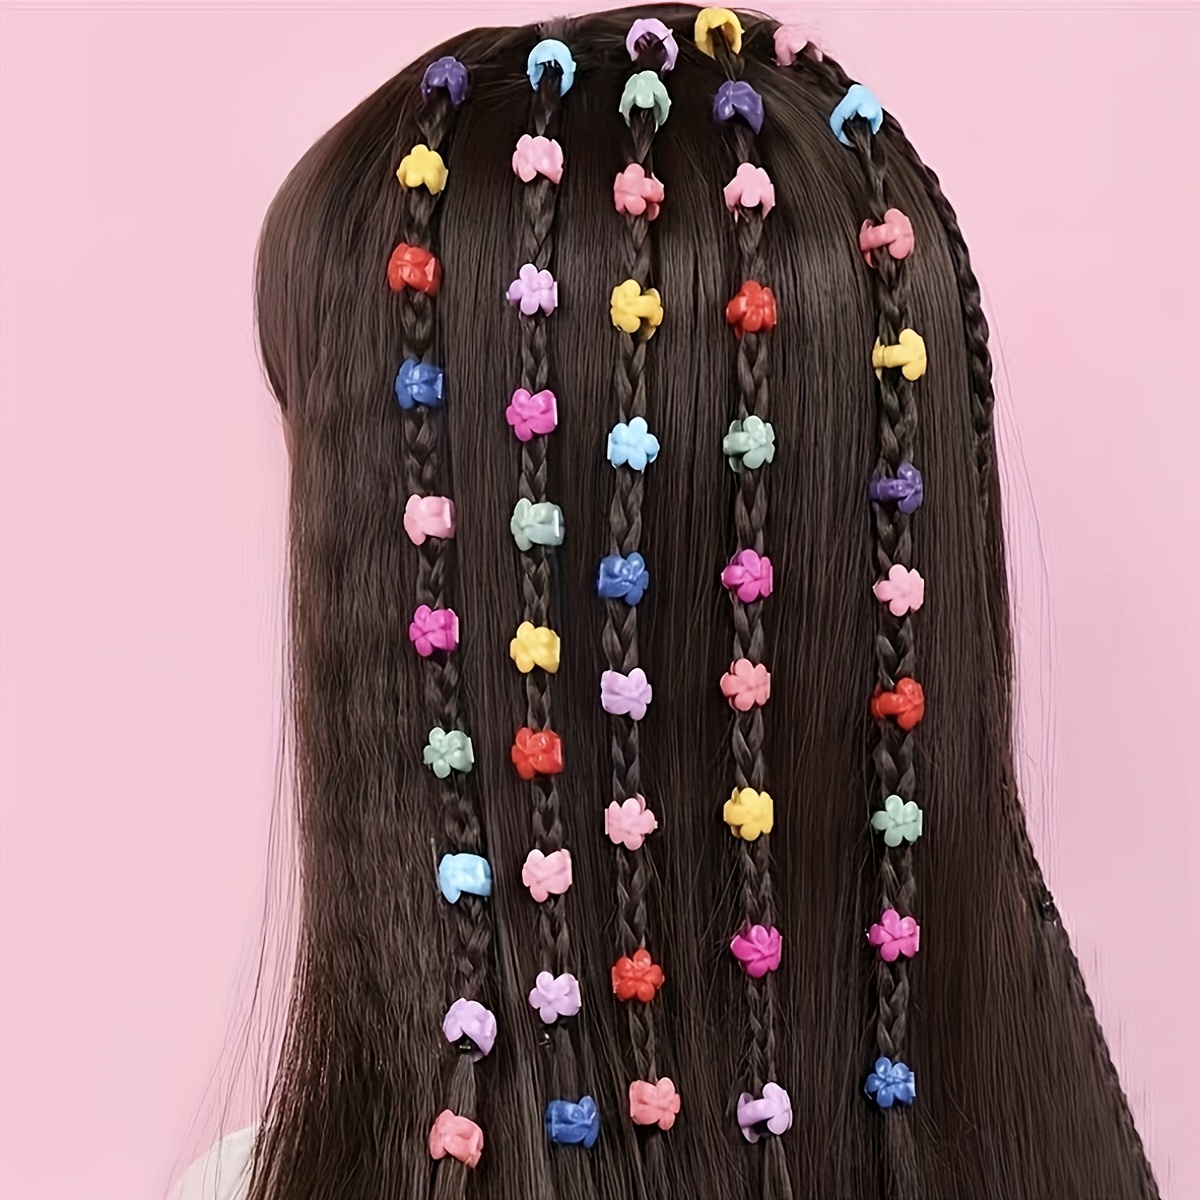 

100pcs Random Color Flowers Shaped Hair Clips Colorful Flowers Claw Clips Hair Accessories For Toddler Girls, Ideal Choice For Gifts